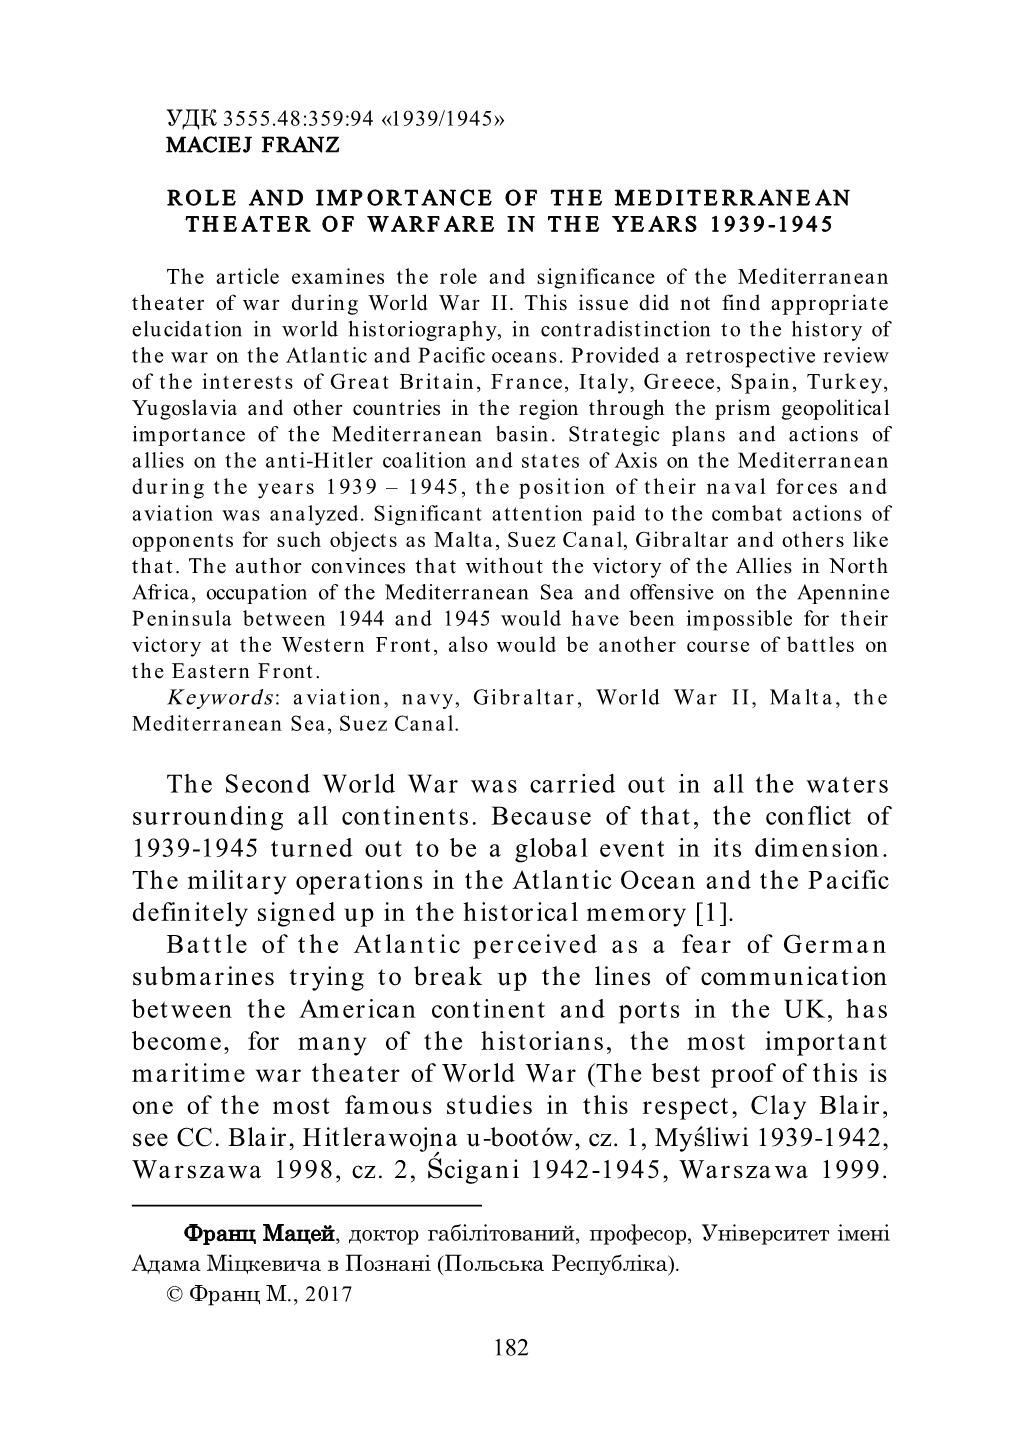 The Second World War Was Carried out in All the Waters Surrounding All Continents. Because of That, the Conflict of 1939-1945 Tu